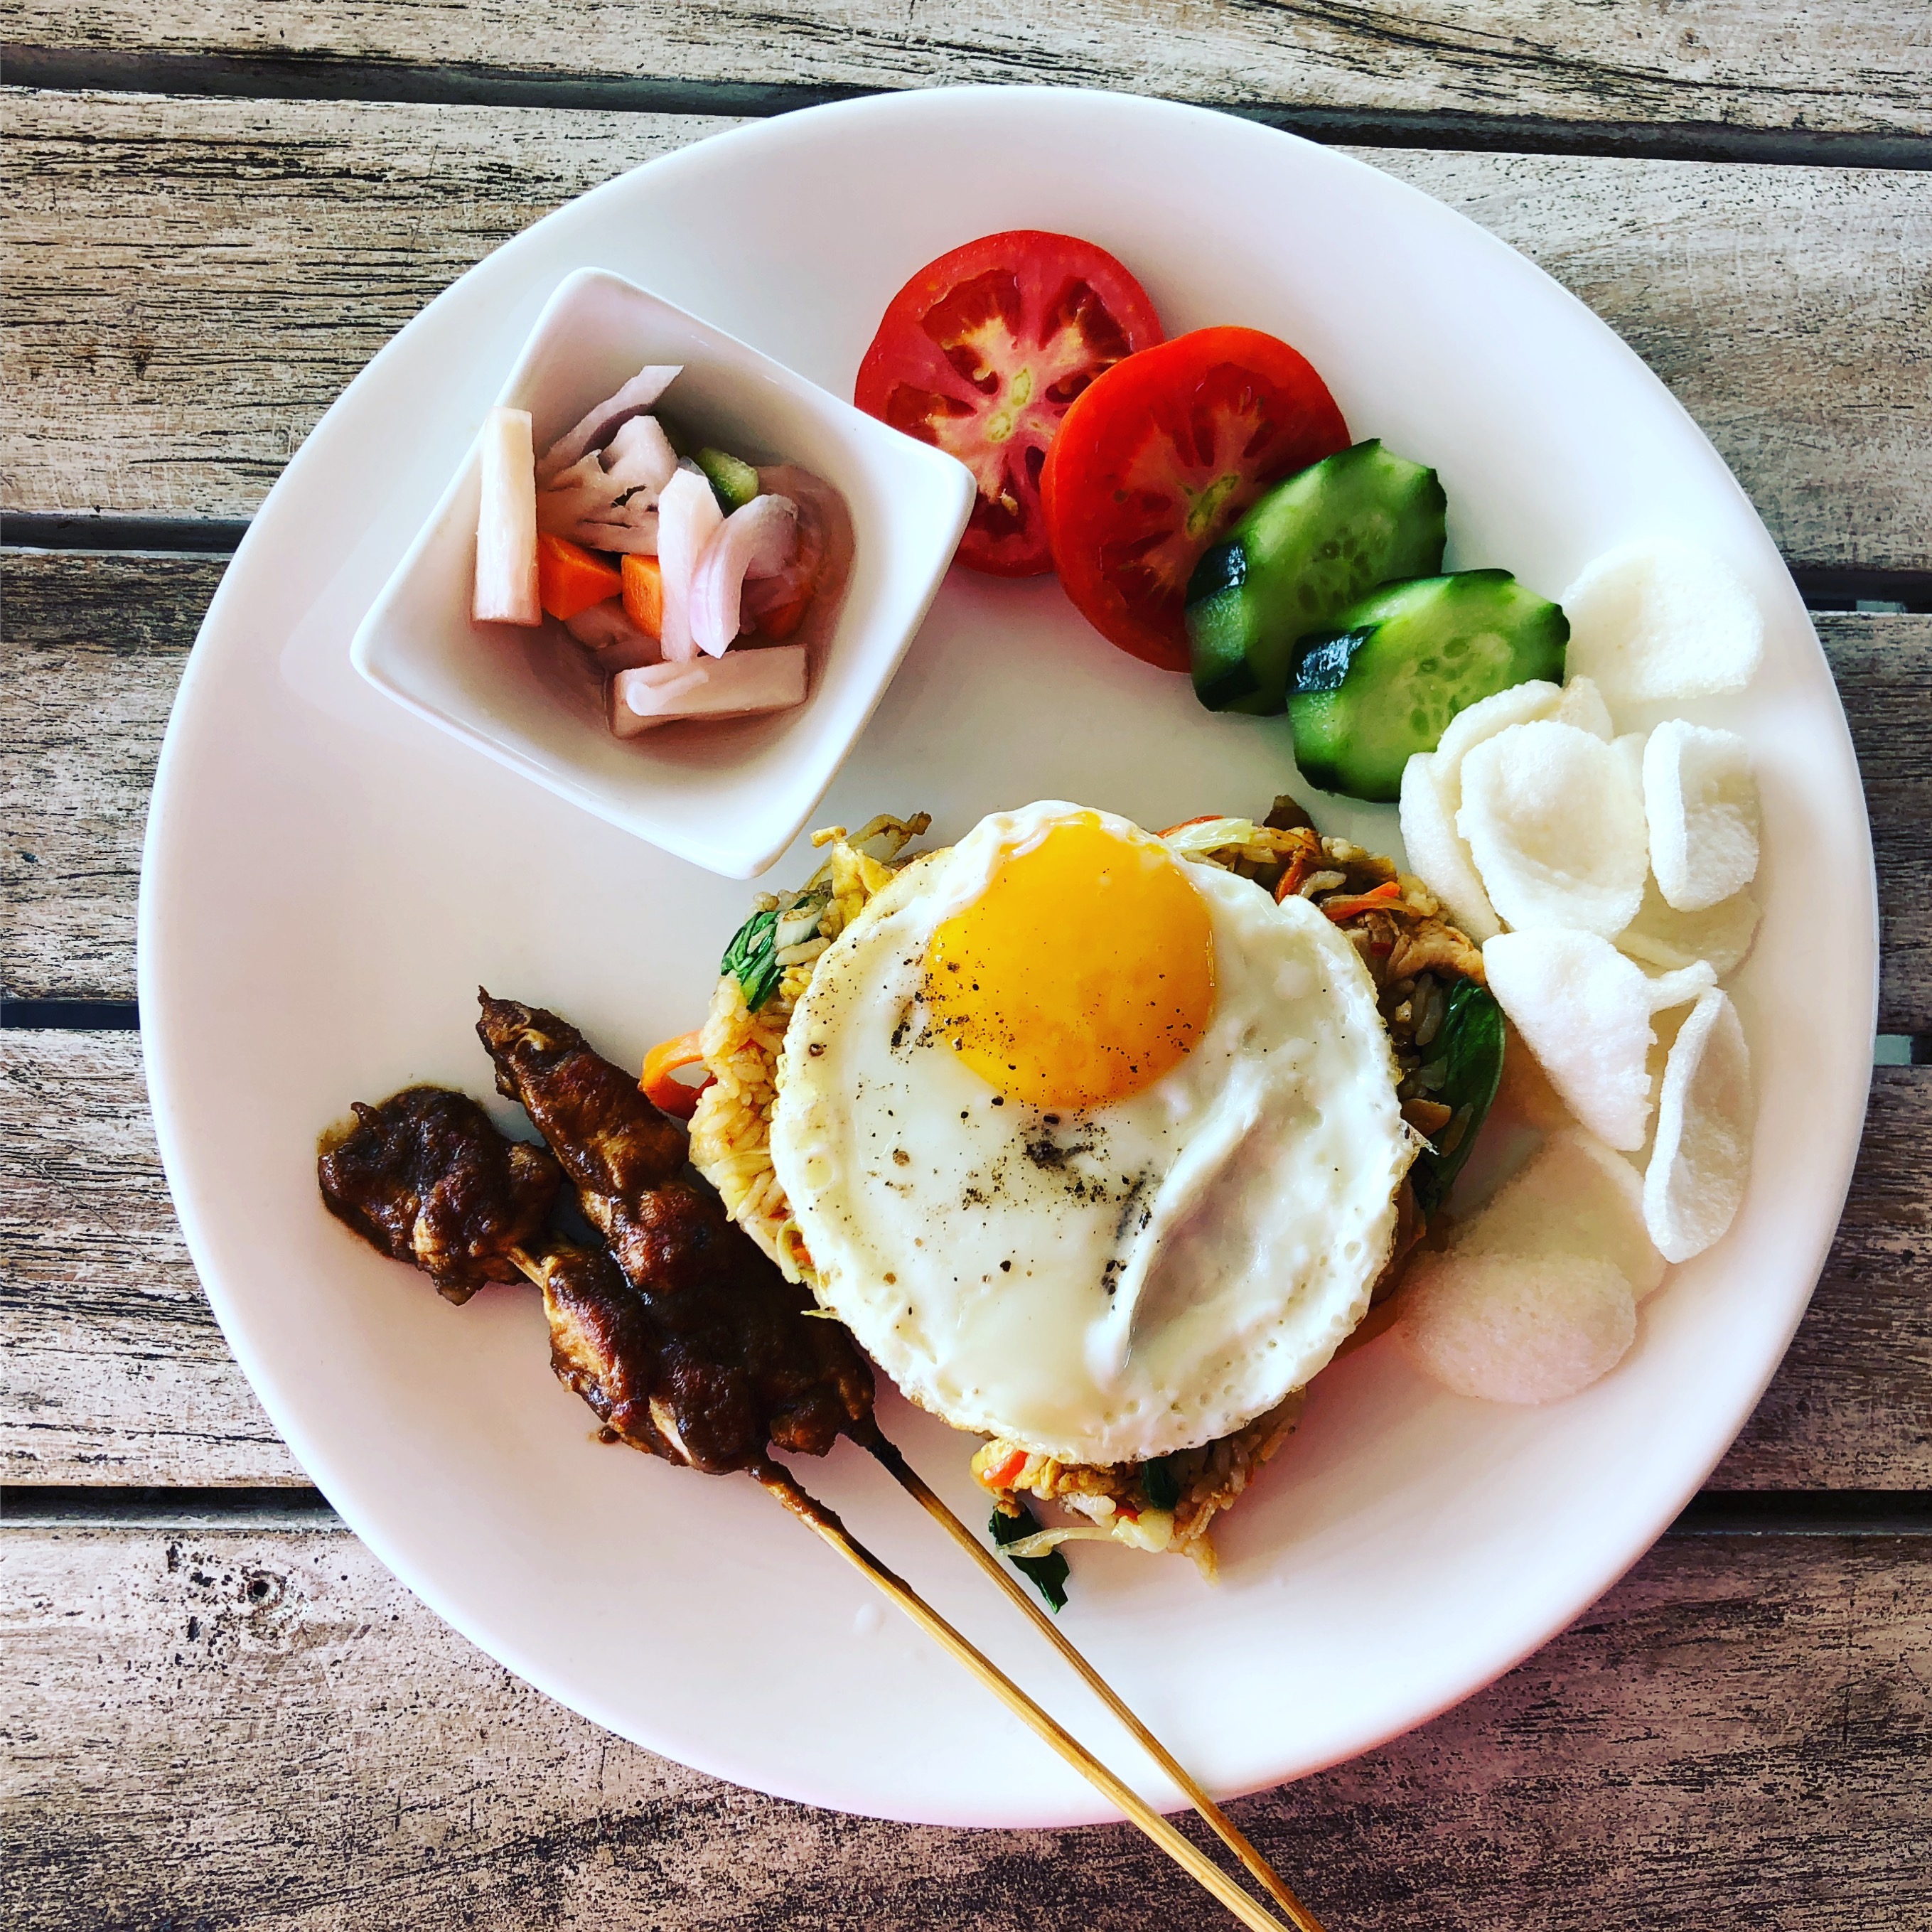 What to eat when in Bali